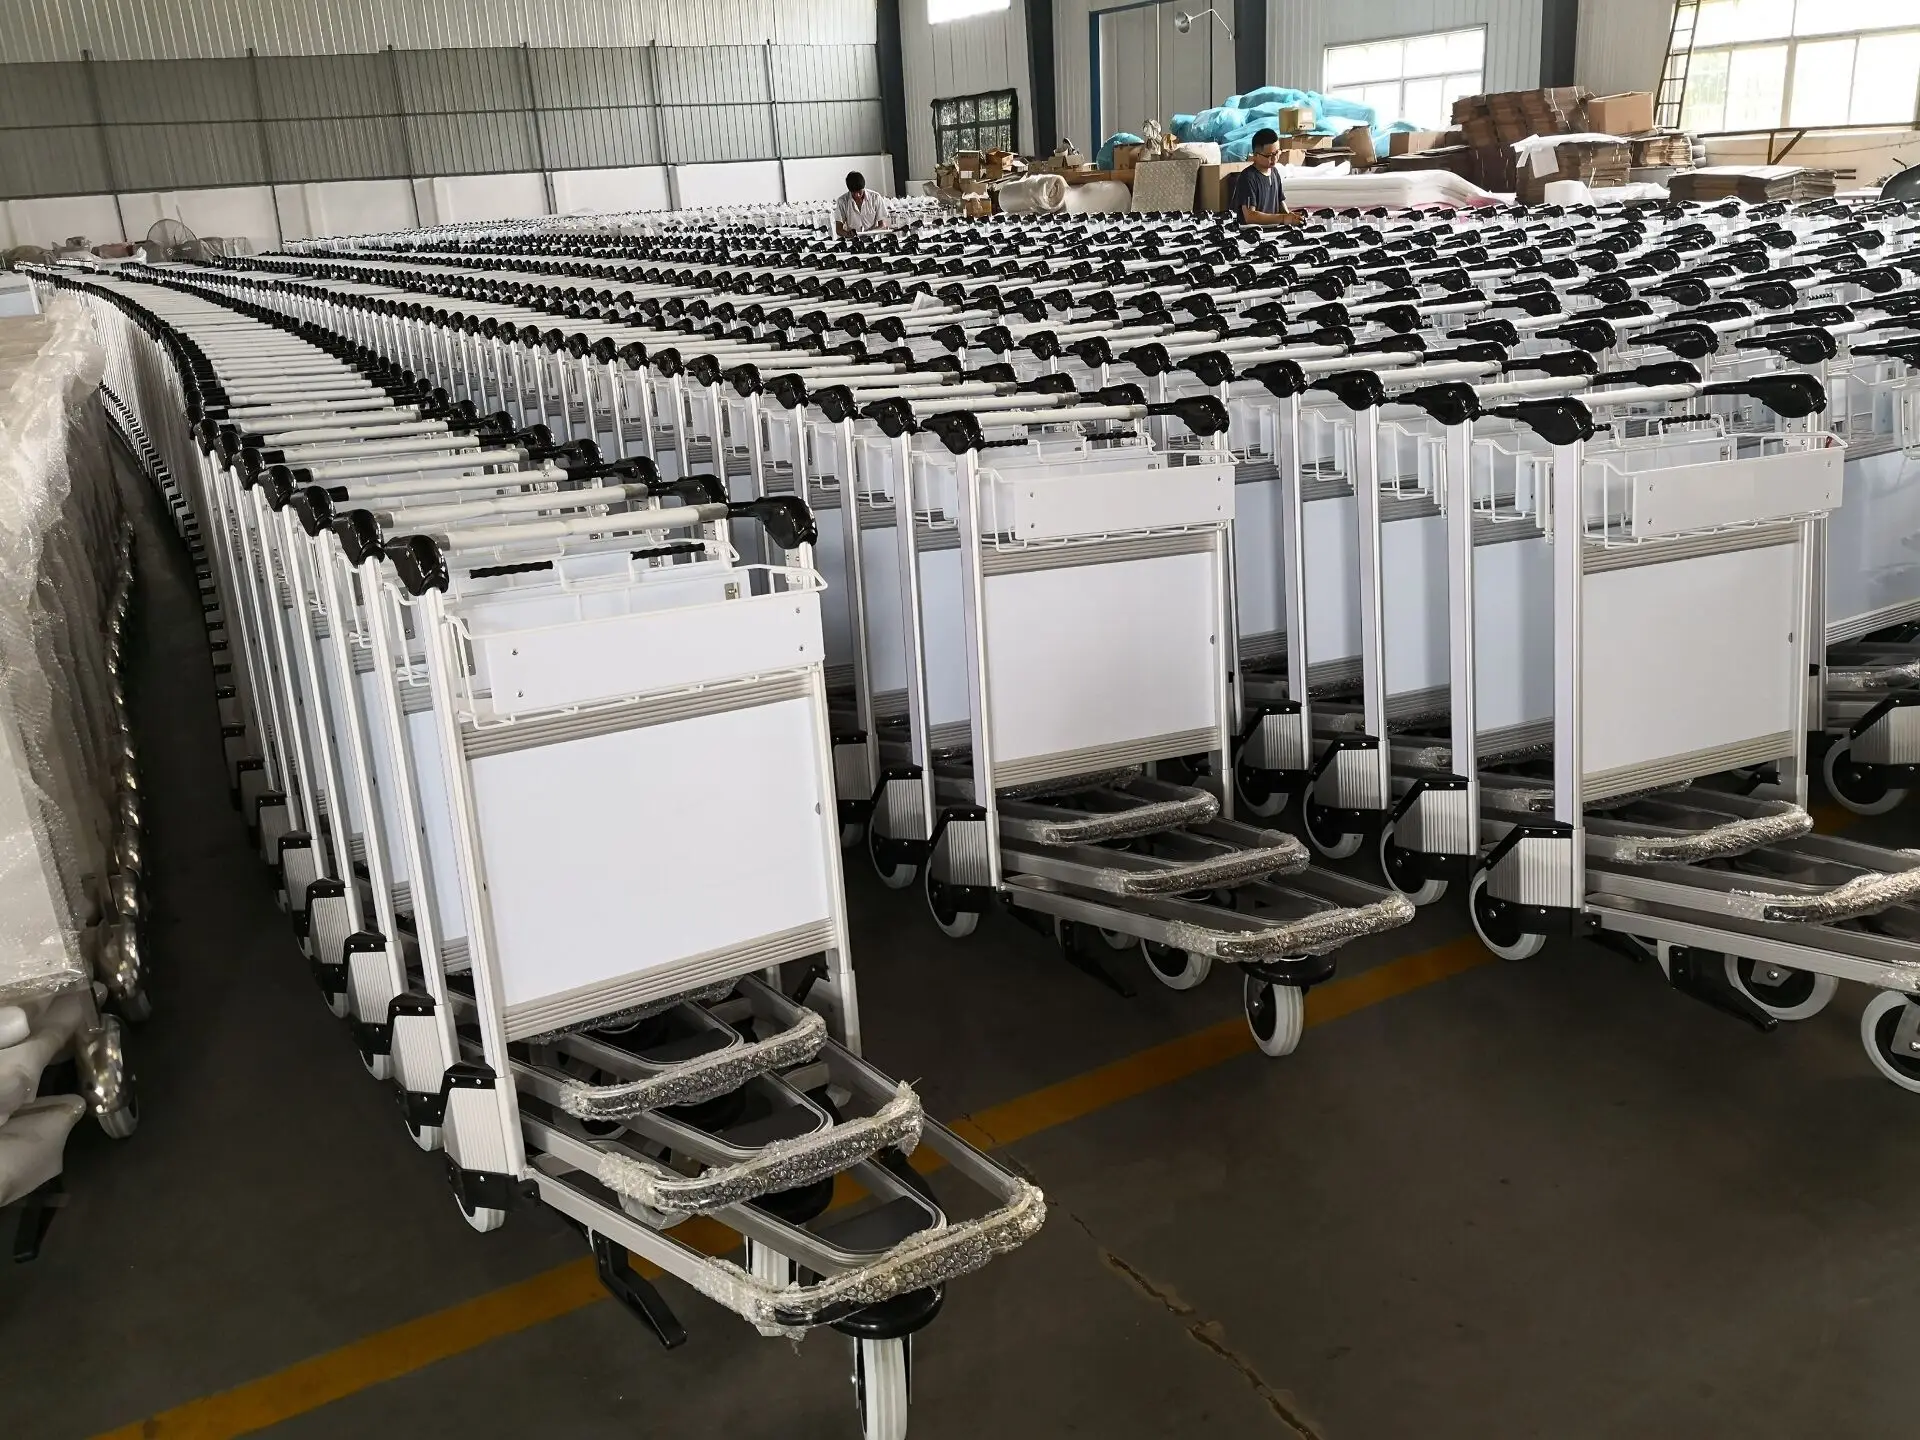 2019 High-grade Airport Luggage Cart Station Luggage Cart Hotel Luggage Cart For Sale - Buy High 